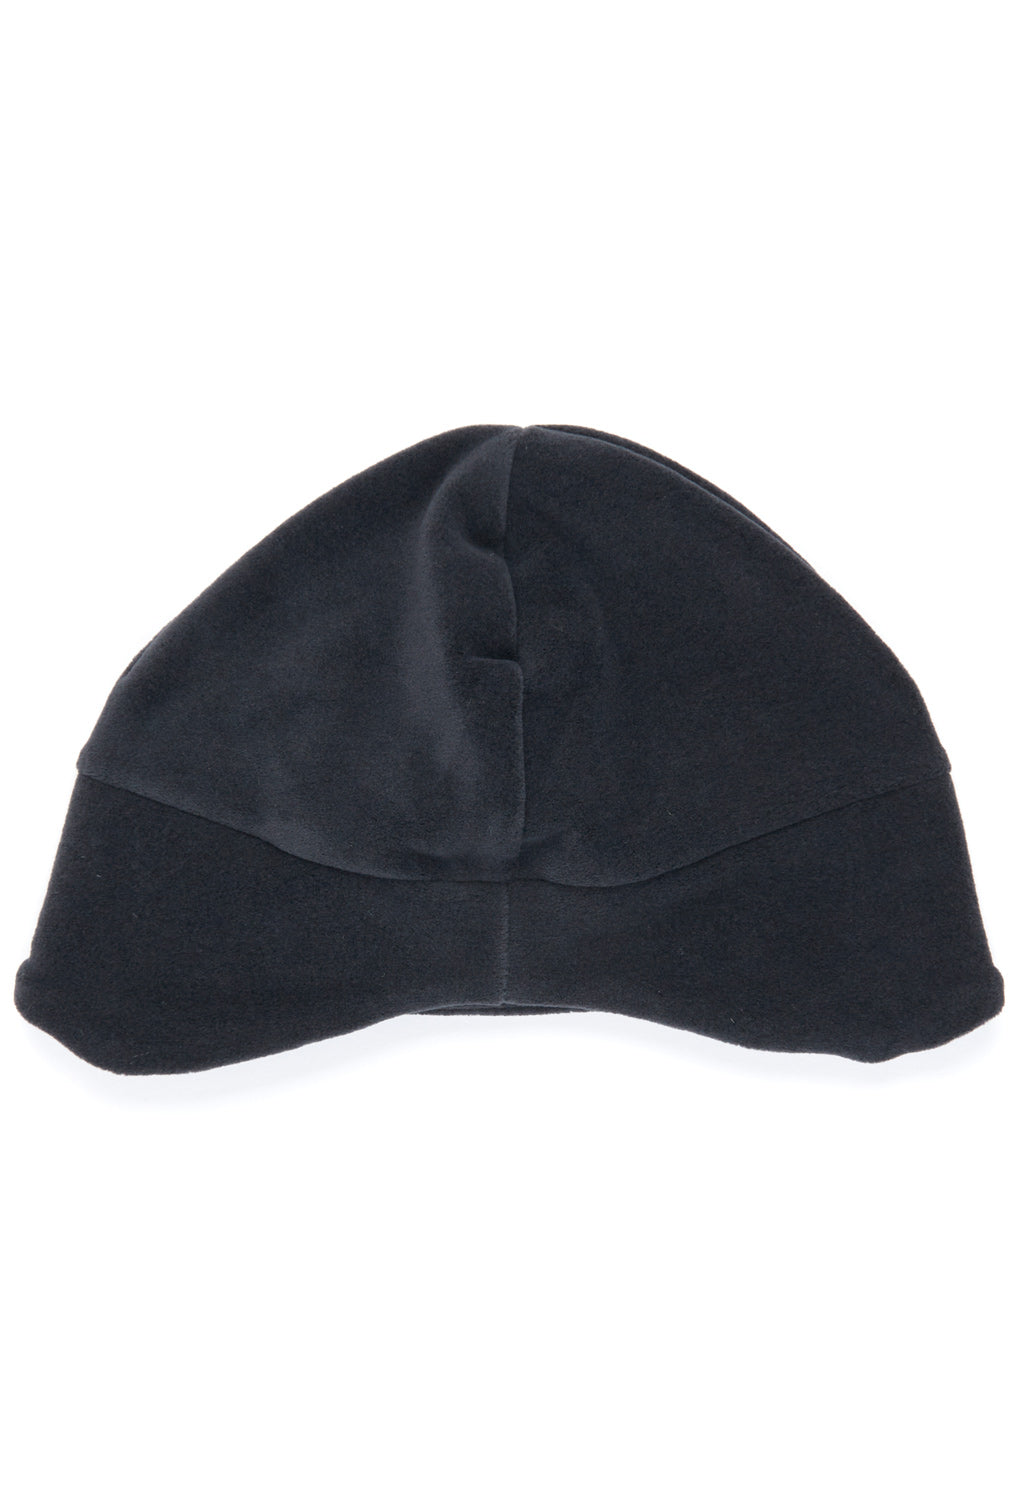 Montbell Chameece Cap With Ear Warmer - Black